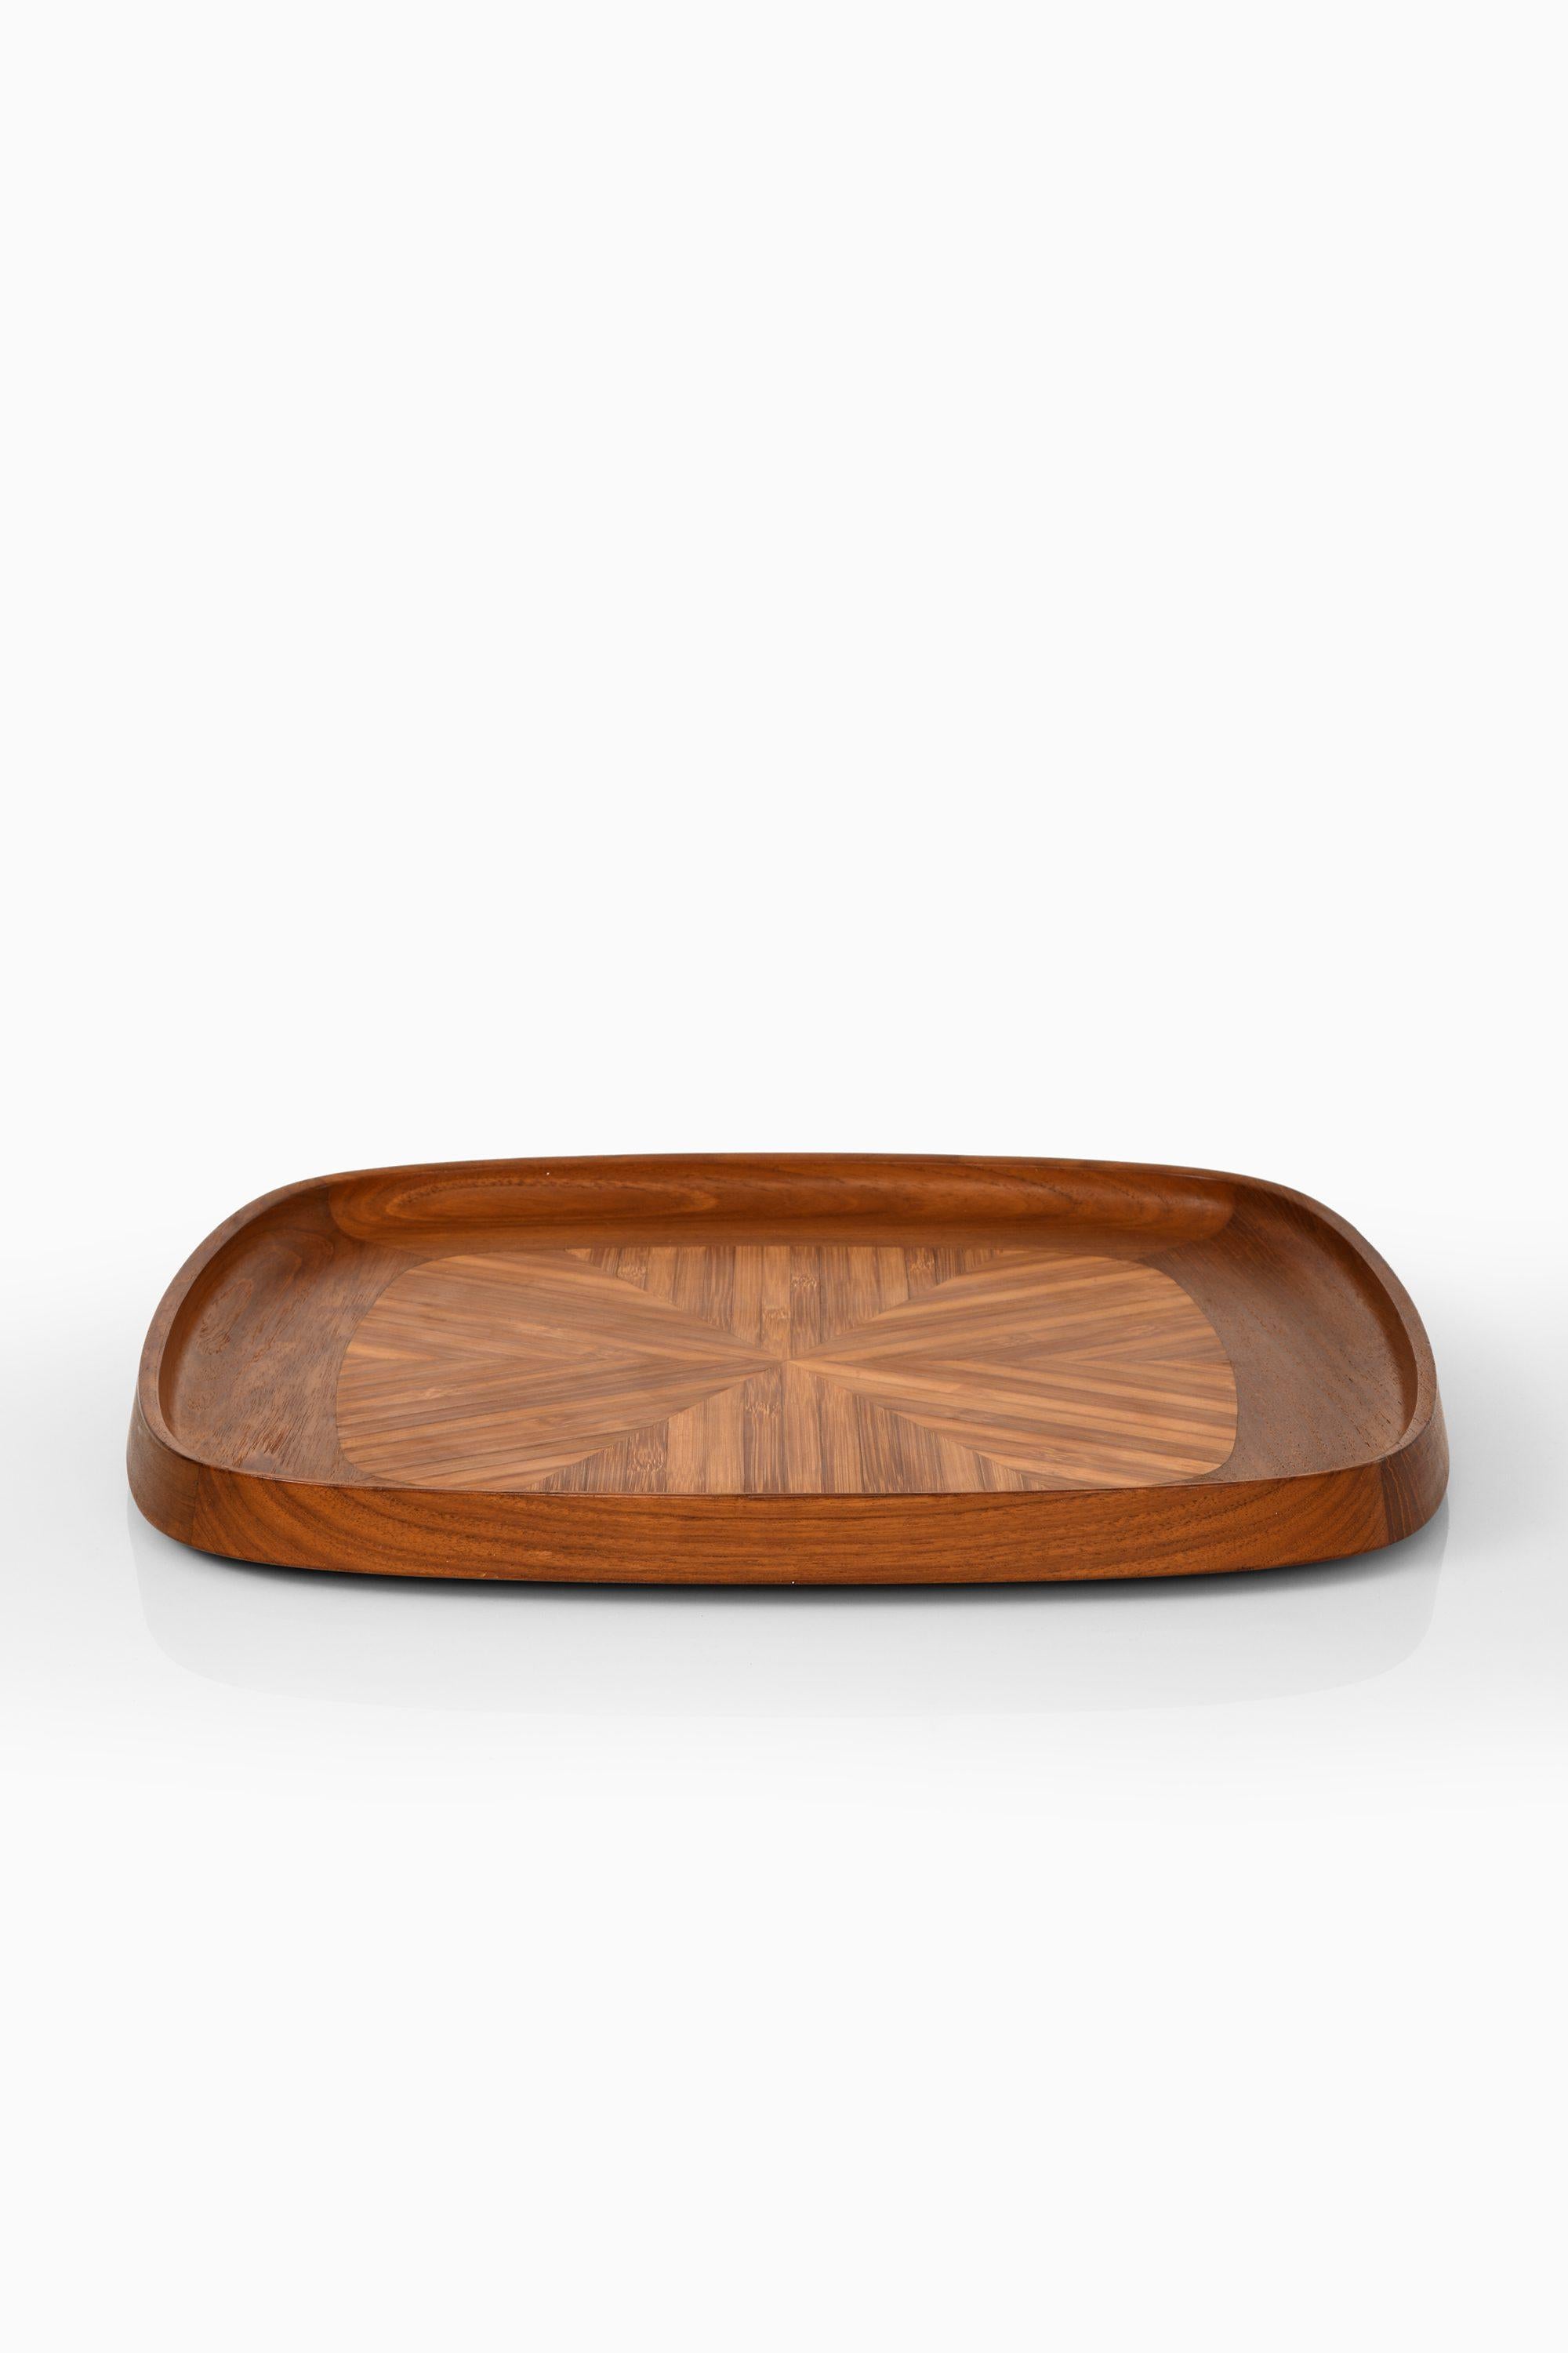 Serving Tray in Teak and Bamboo by Jens Quistgaard, 1950's

Additional Information:
Material: Teak and bamboo
Style: Mid century, Scandinavian
Produced by Dansk in Denmark
Dimensions (W x D x H): 49 x 49 x 4 cm
Condition: Good vintage condition,